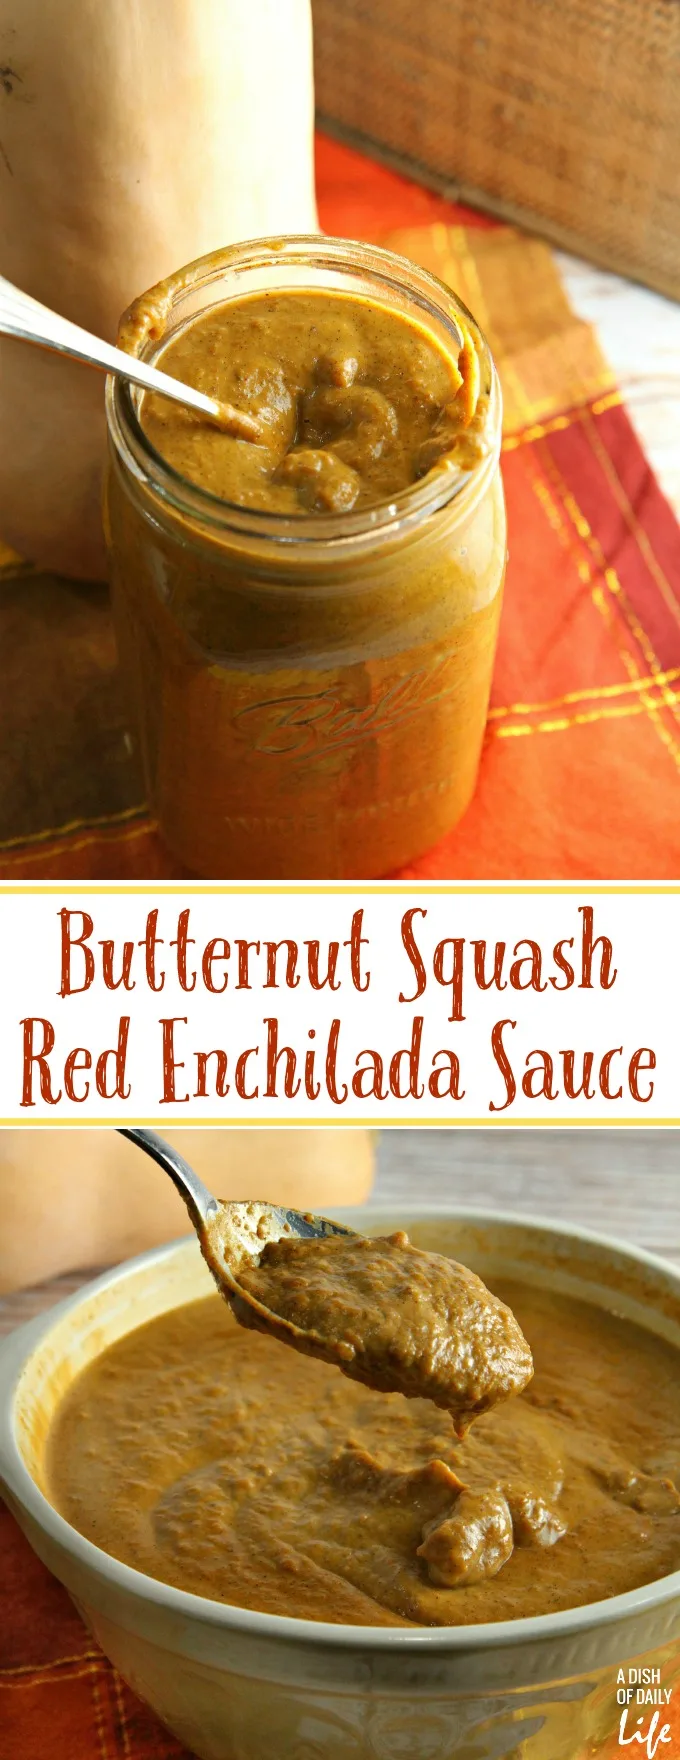 Add a seasonal twist to your homemade red chile enchilada sauce by adding roasted butternut squash. The resulting Butternut Squash Red Enchilada Sauce recipe is a versatile sauce that you can use with a variety of Mexican dishes!